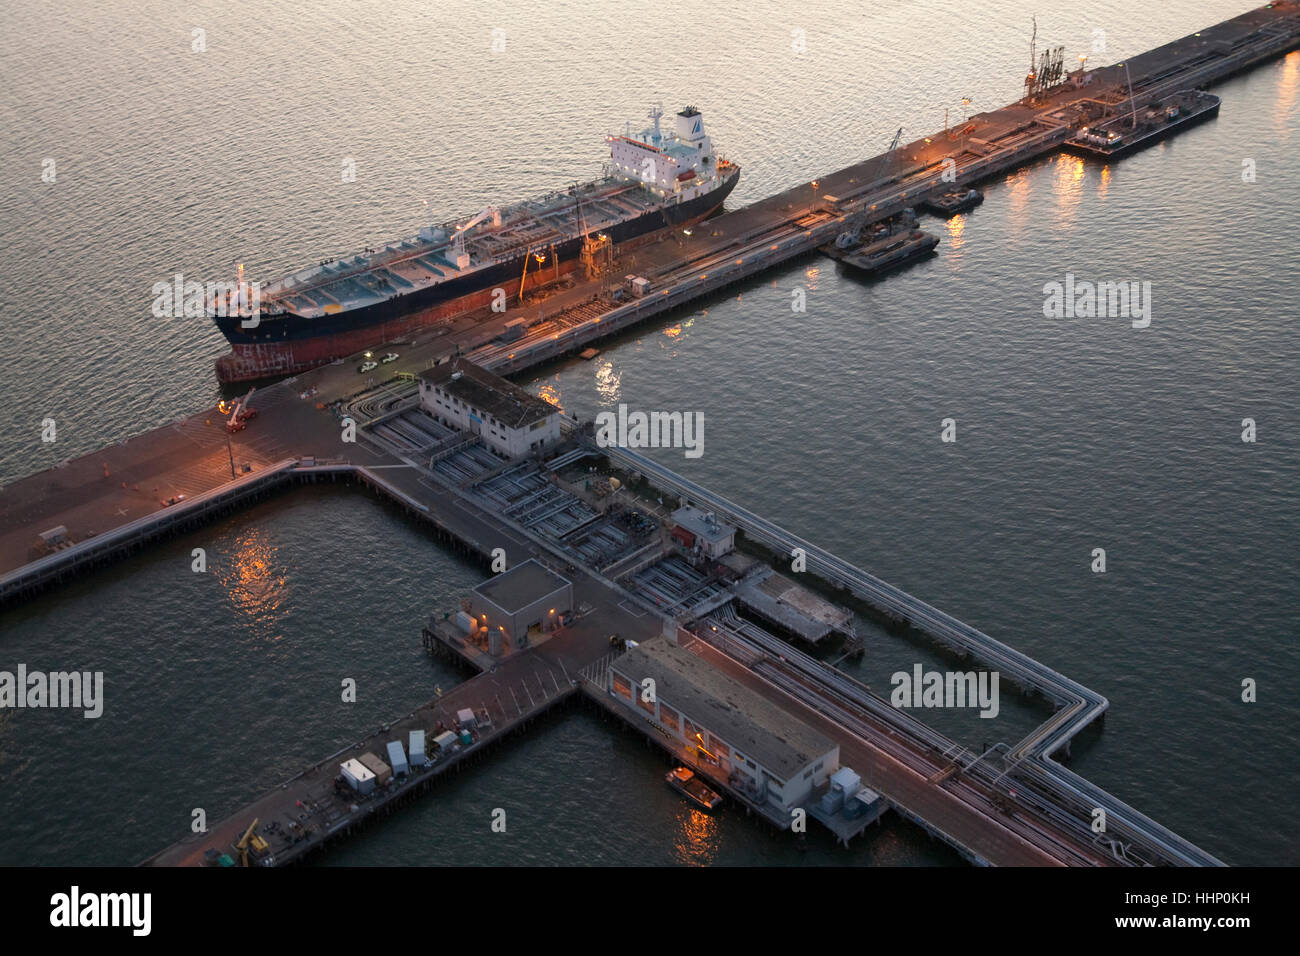 Aerial view of freighter at port Stock Photo